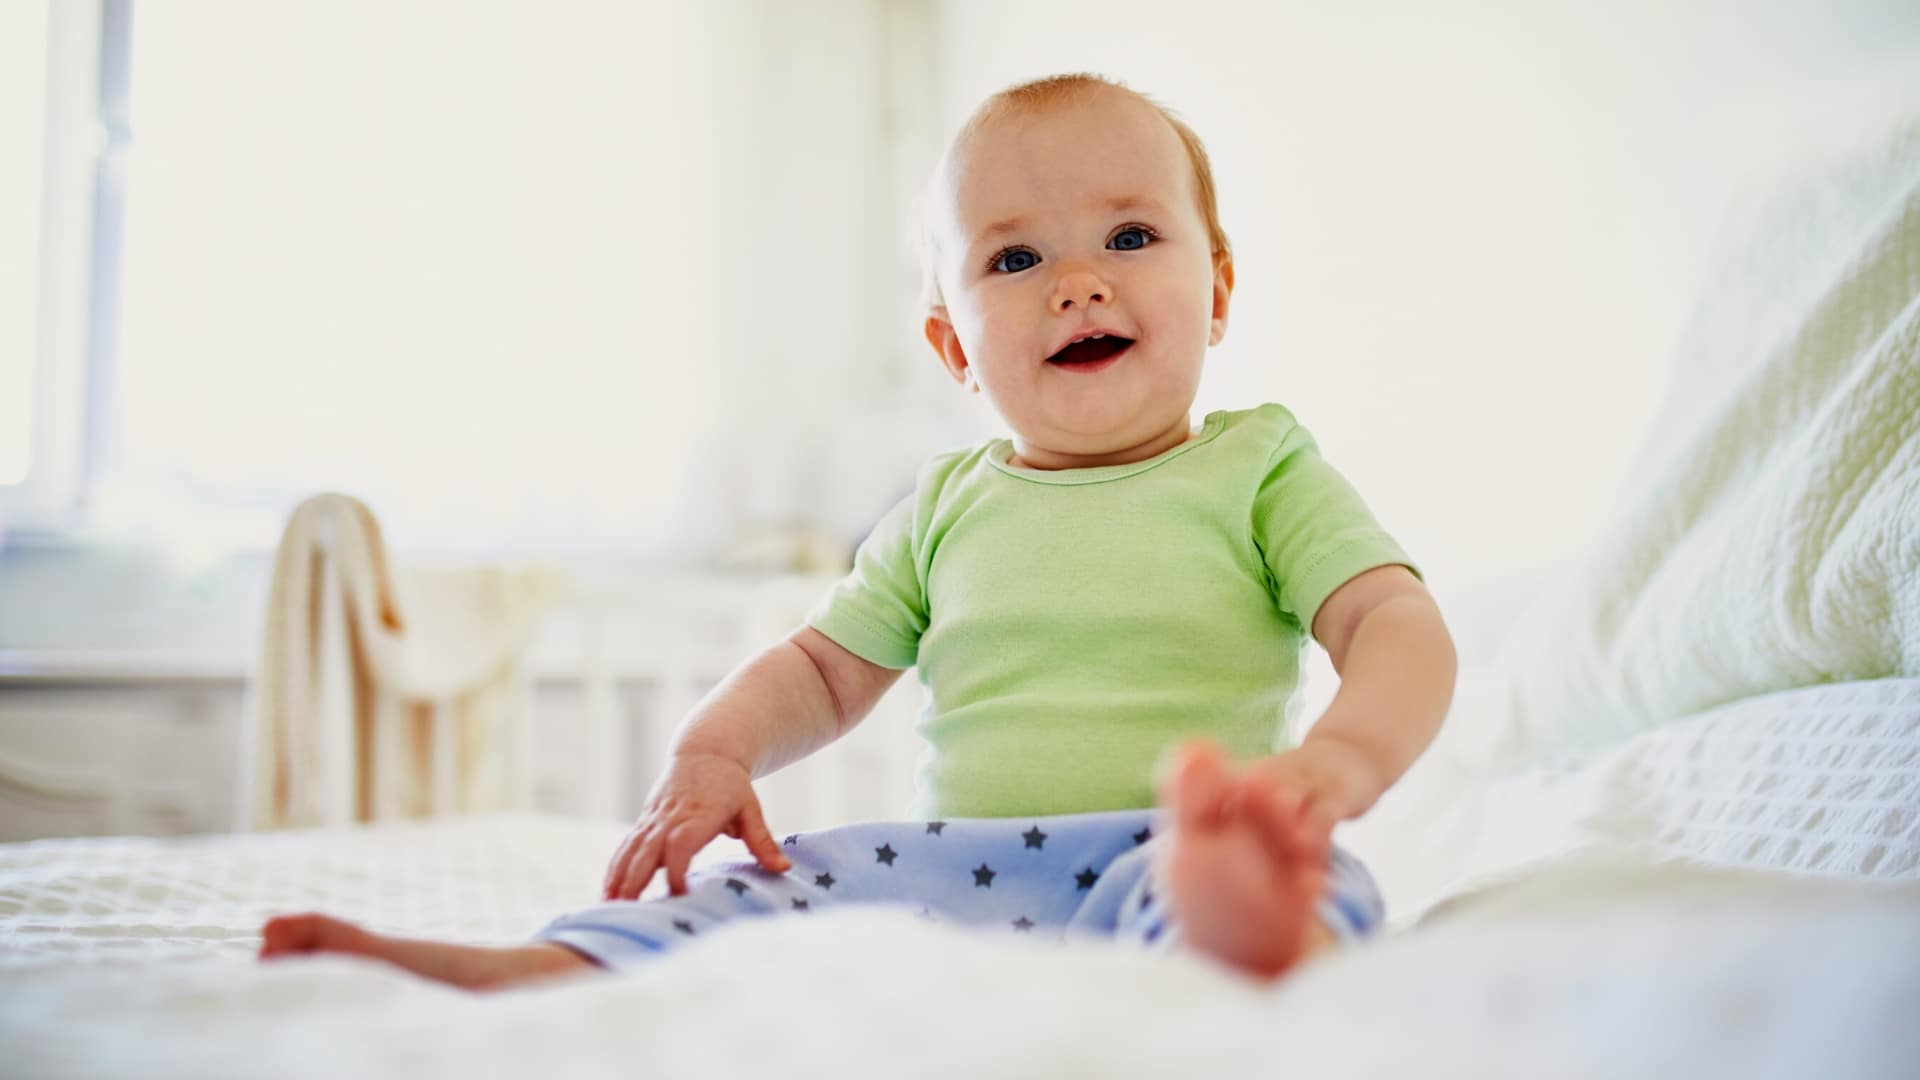 How To Teach A Baby To Lay Down From Sitting? 4 Genius Tips!